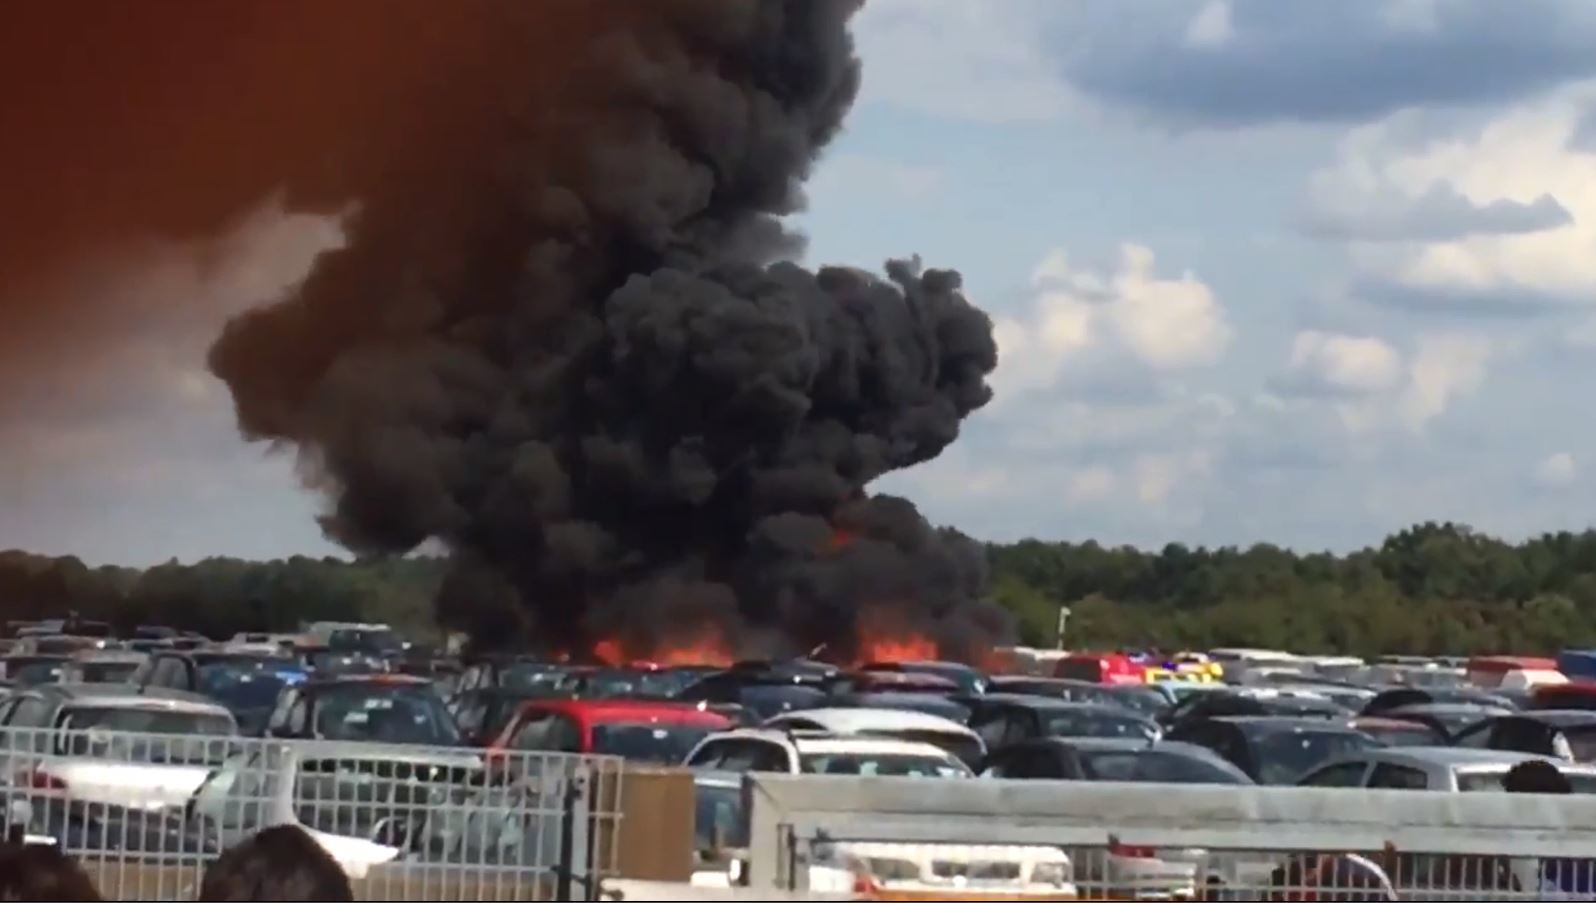 Thick black smoke is blown across the sky following the crash